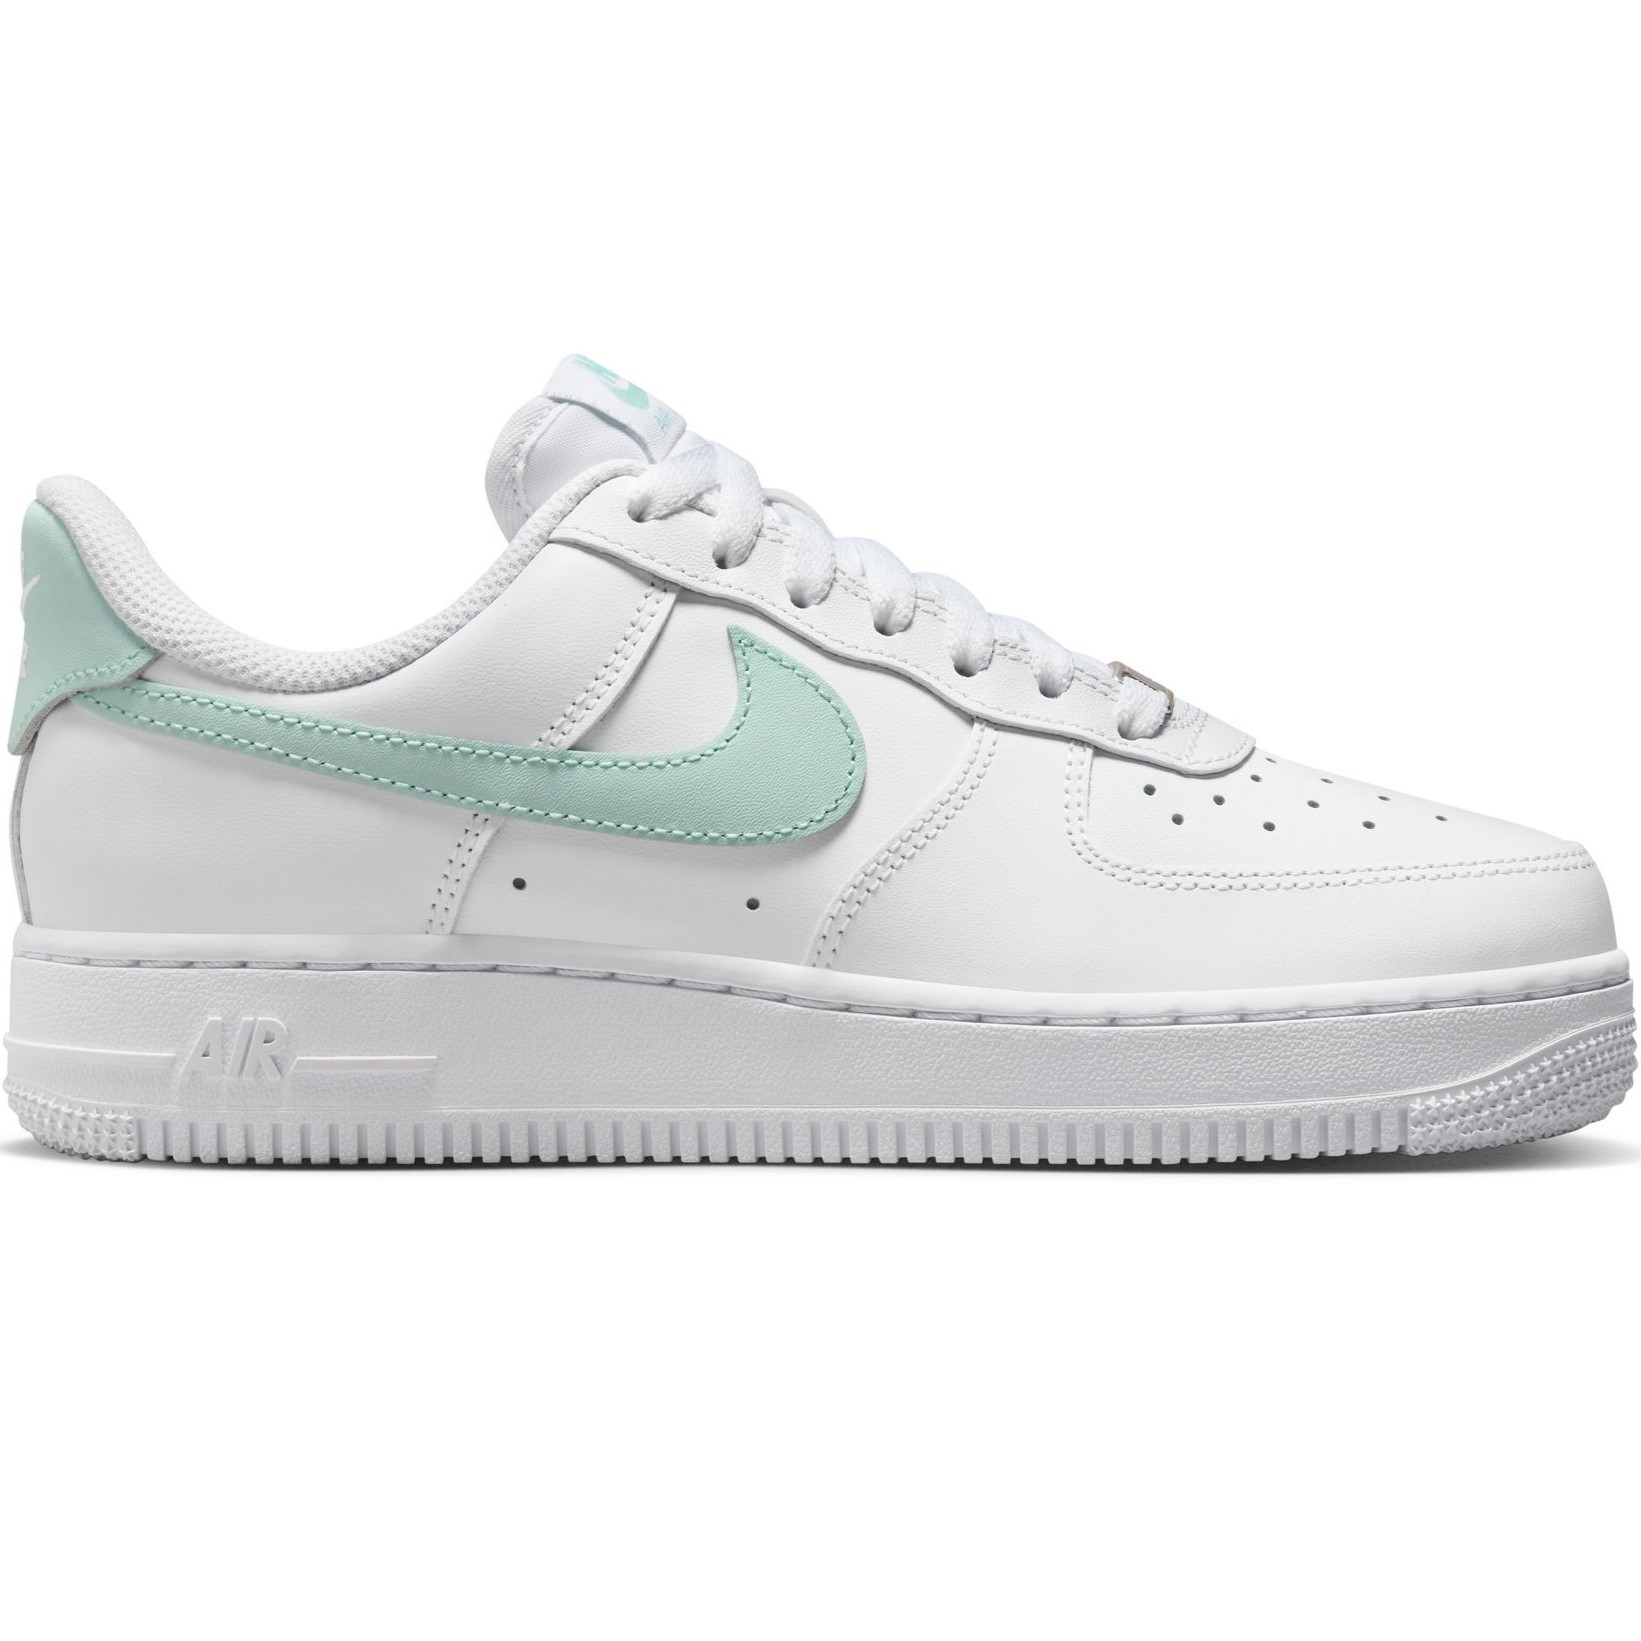 GIÀY NIKE NỮ AIR FORCE 1 07 EASYON WHITE ICE JADE WOMENS SHOES DX5883-101 3